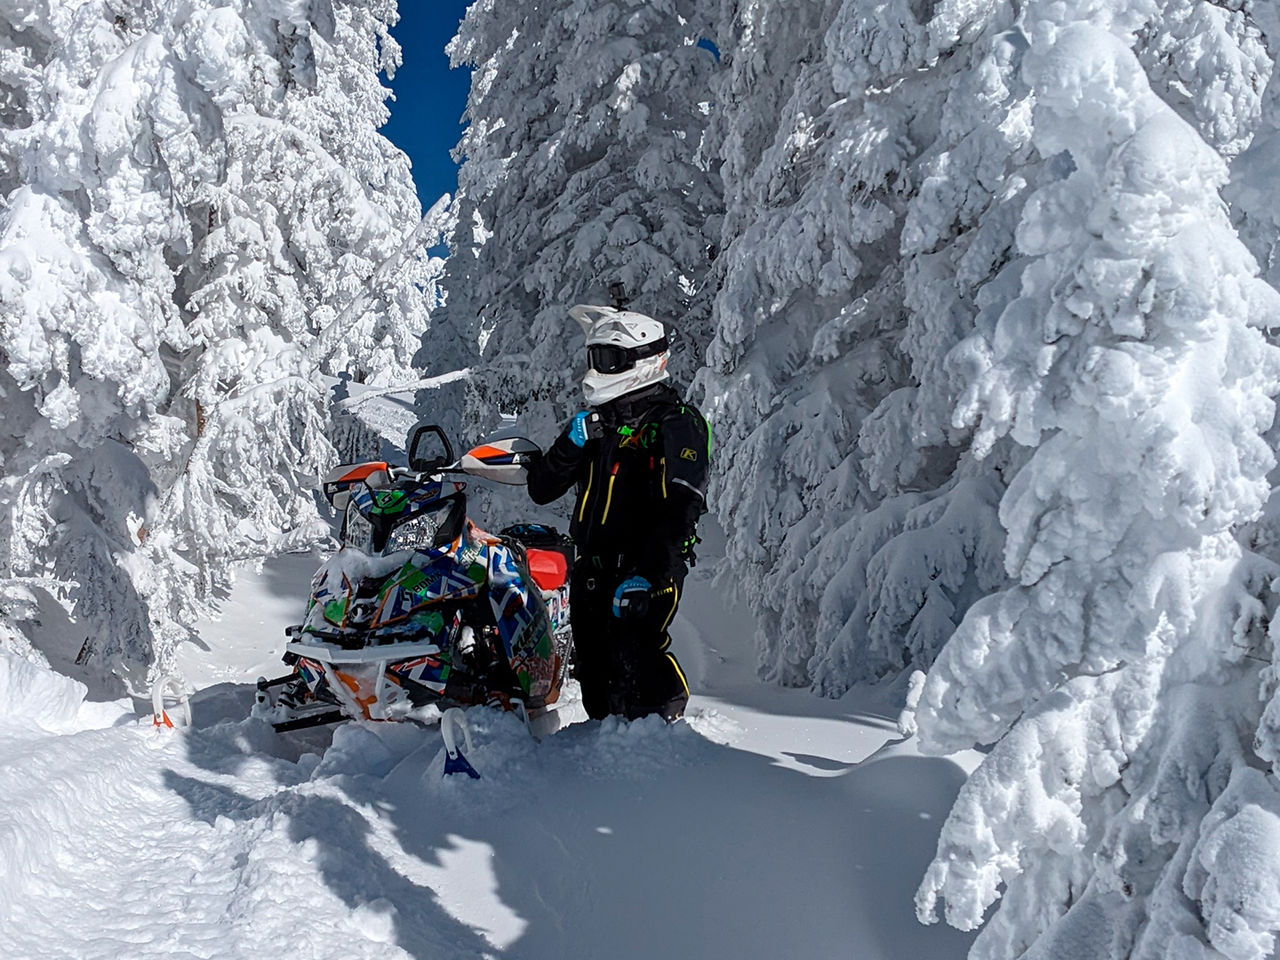 Up your Ski-Doo skills with an elite course in Laramie WY